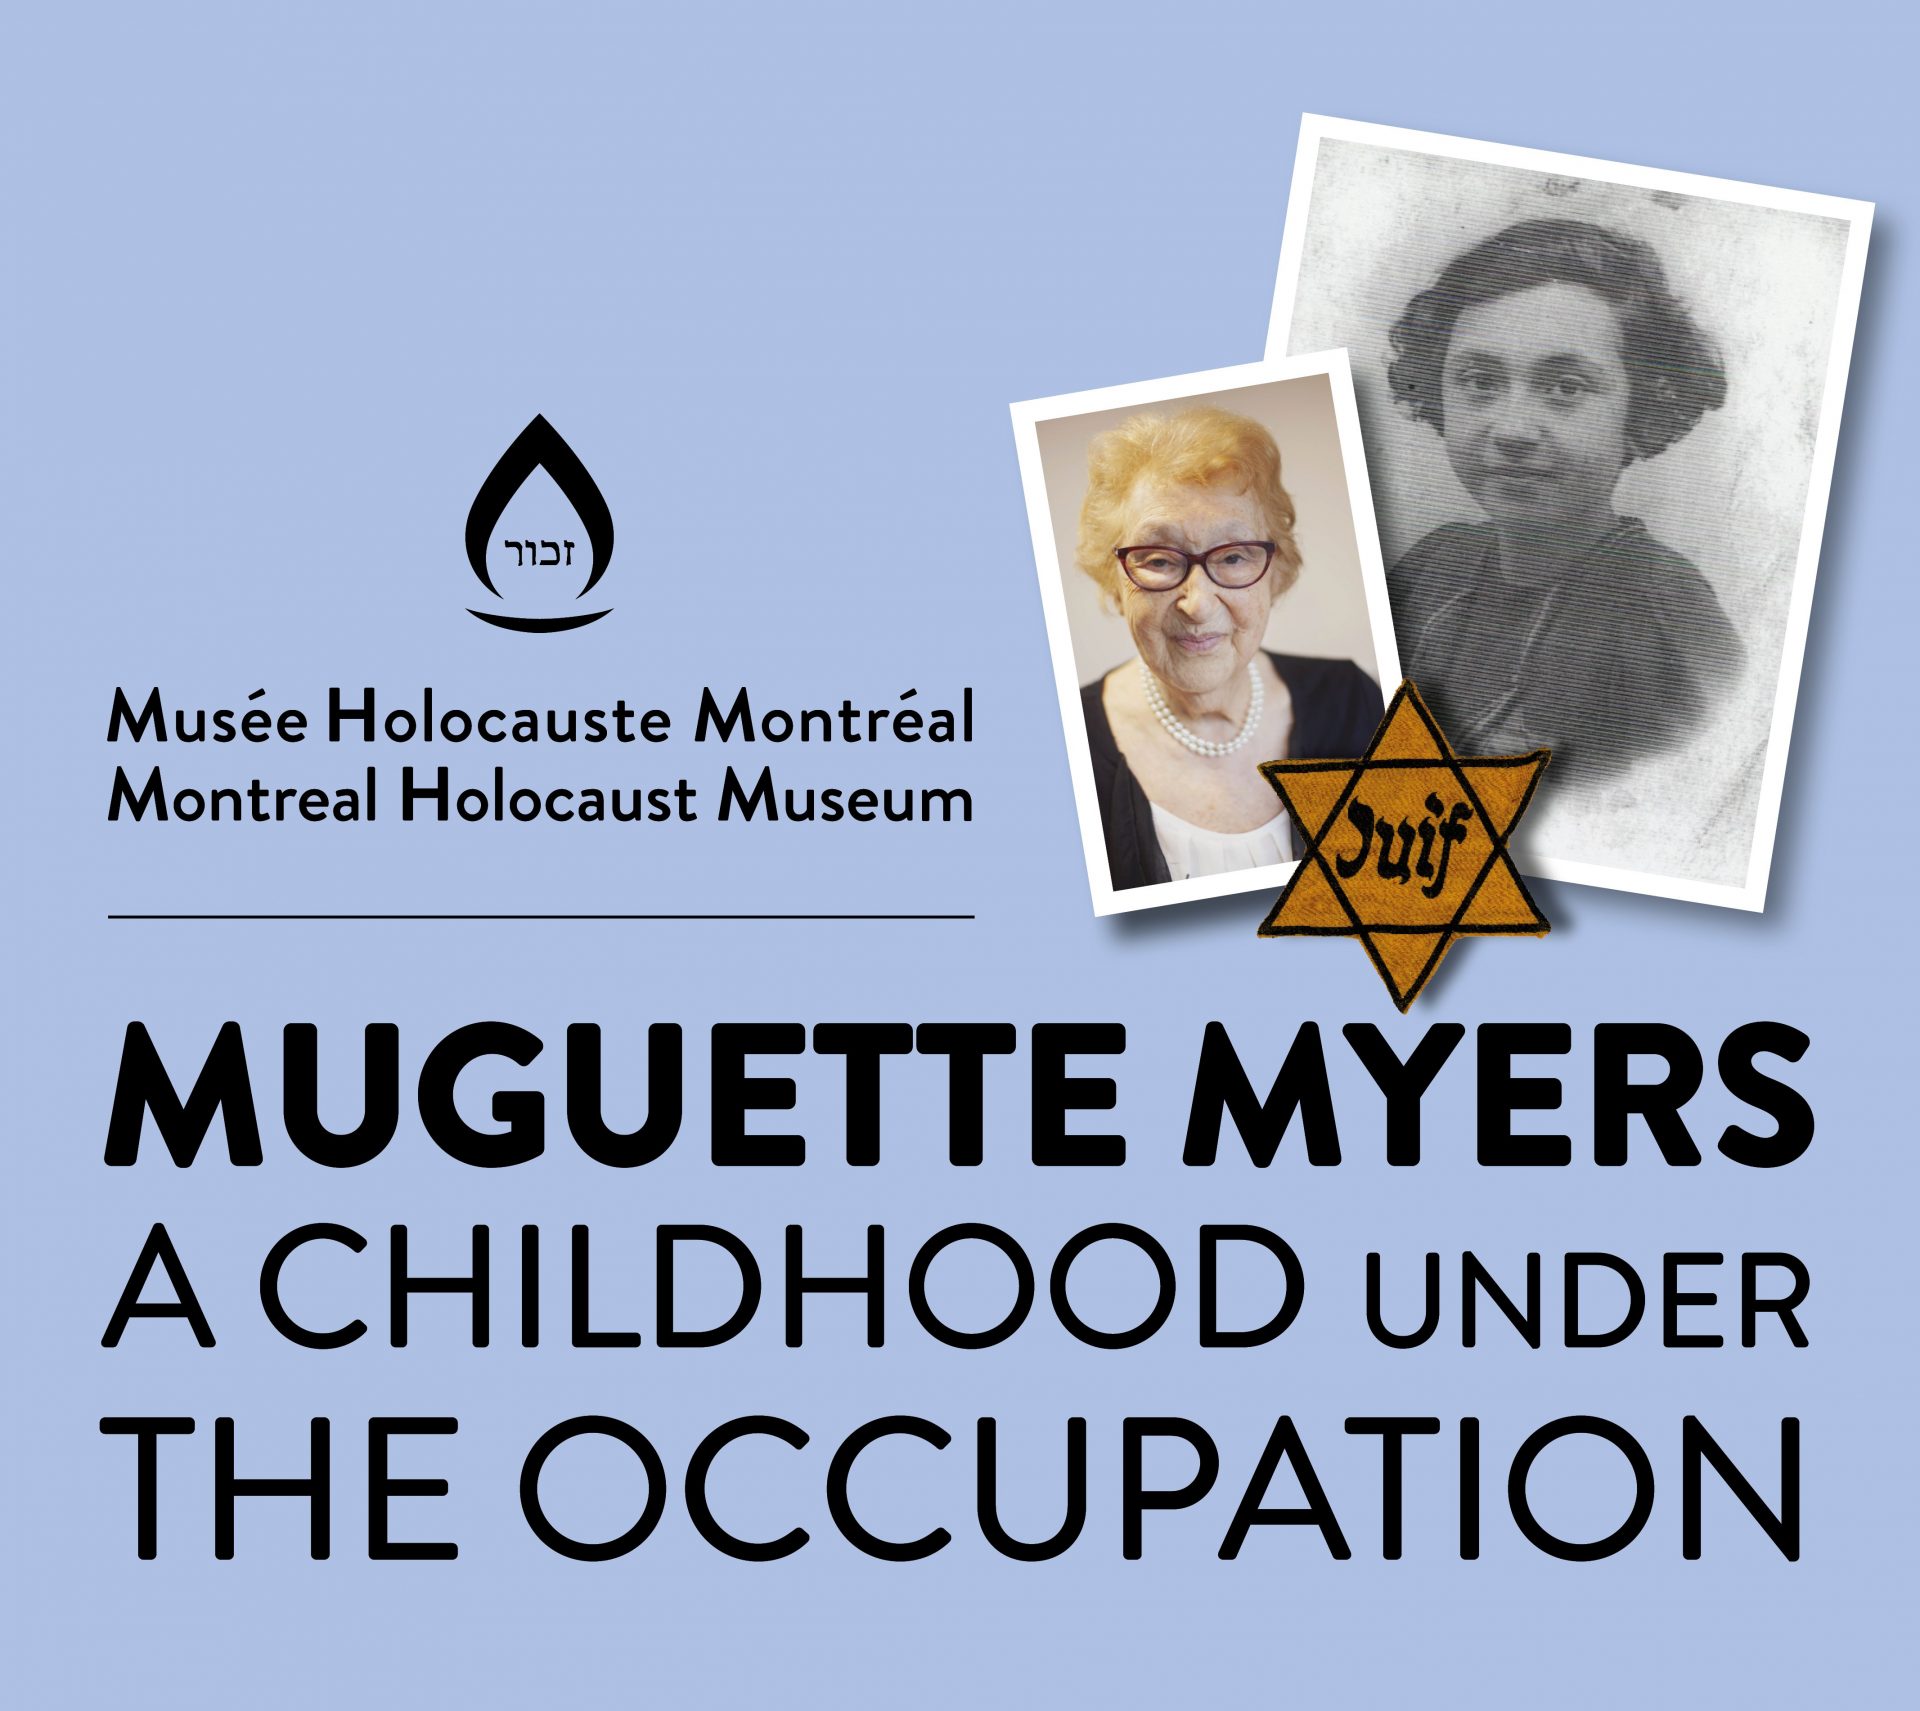 Muguette Myers, a childhood under the occupation